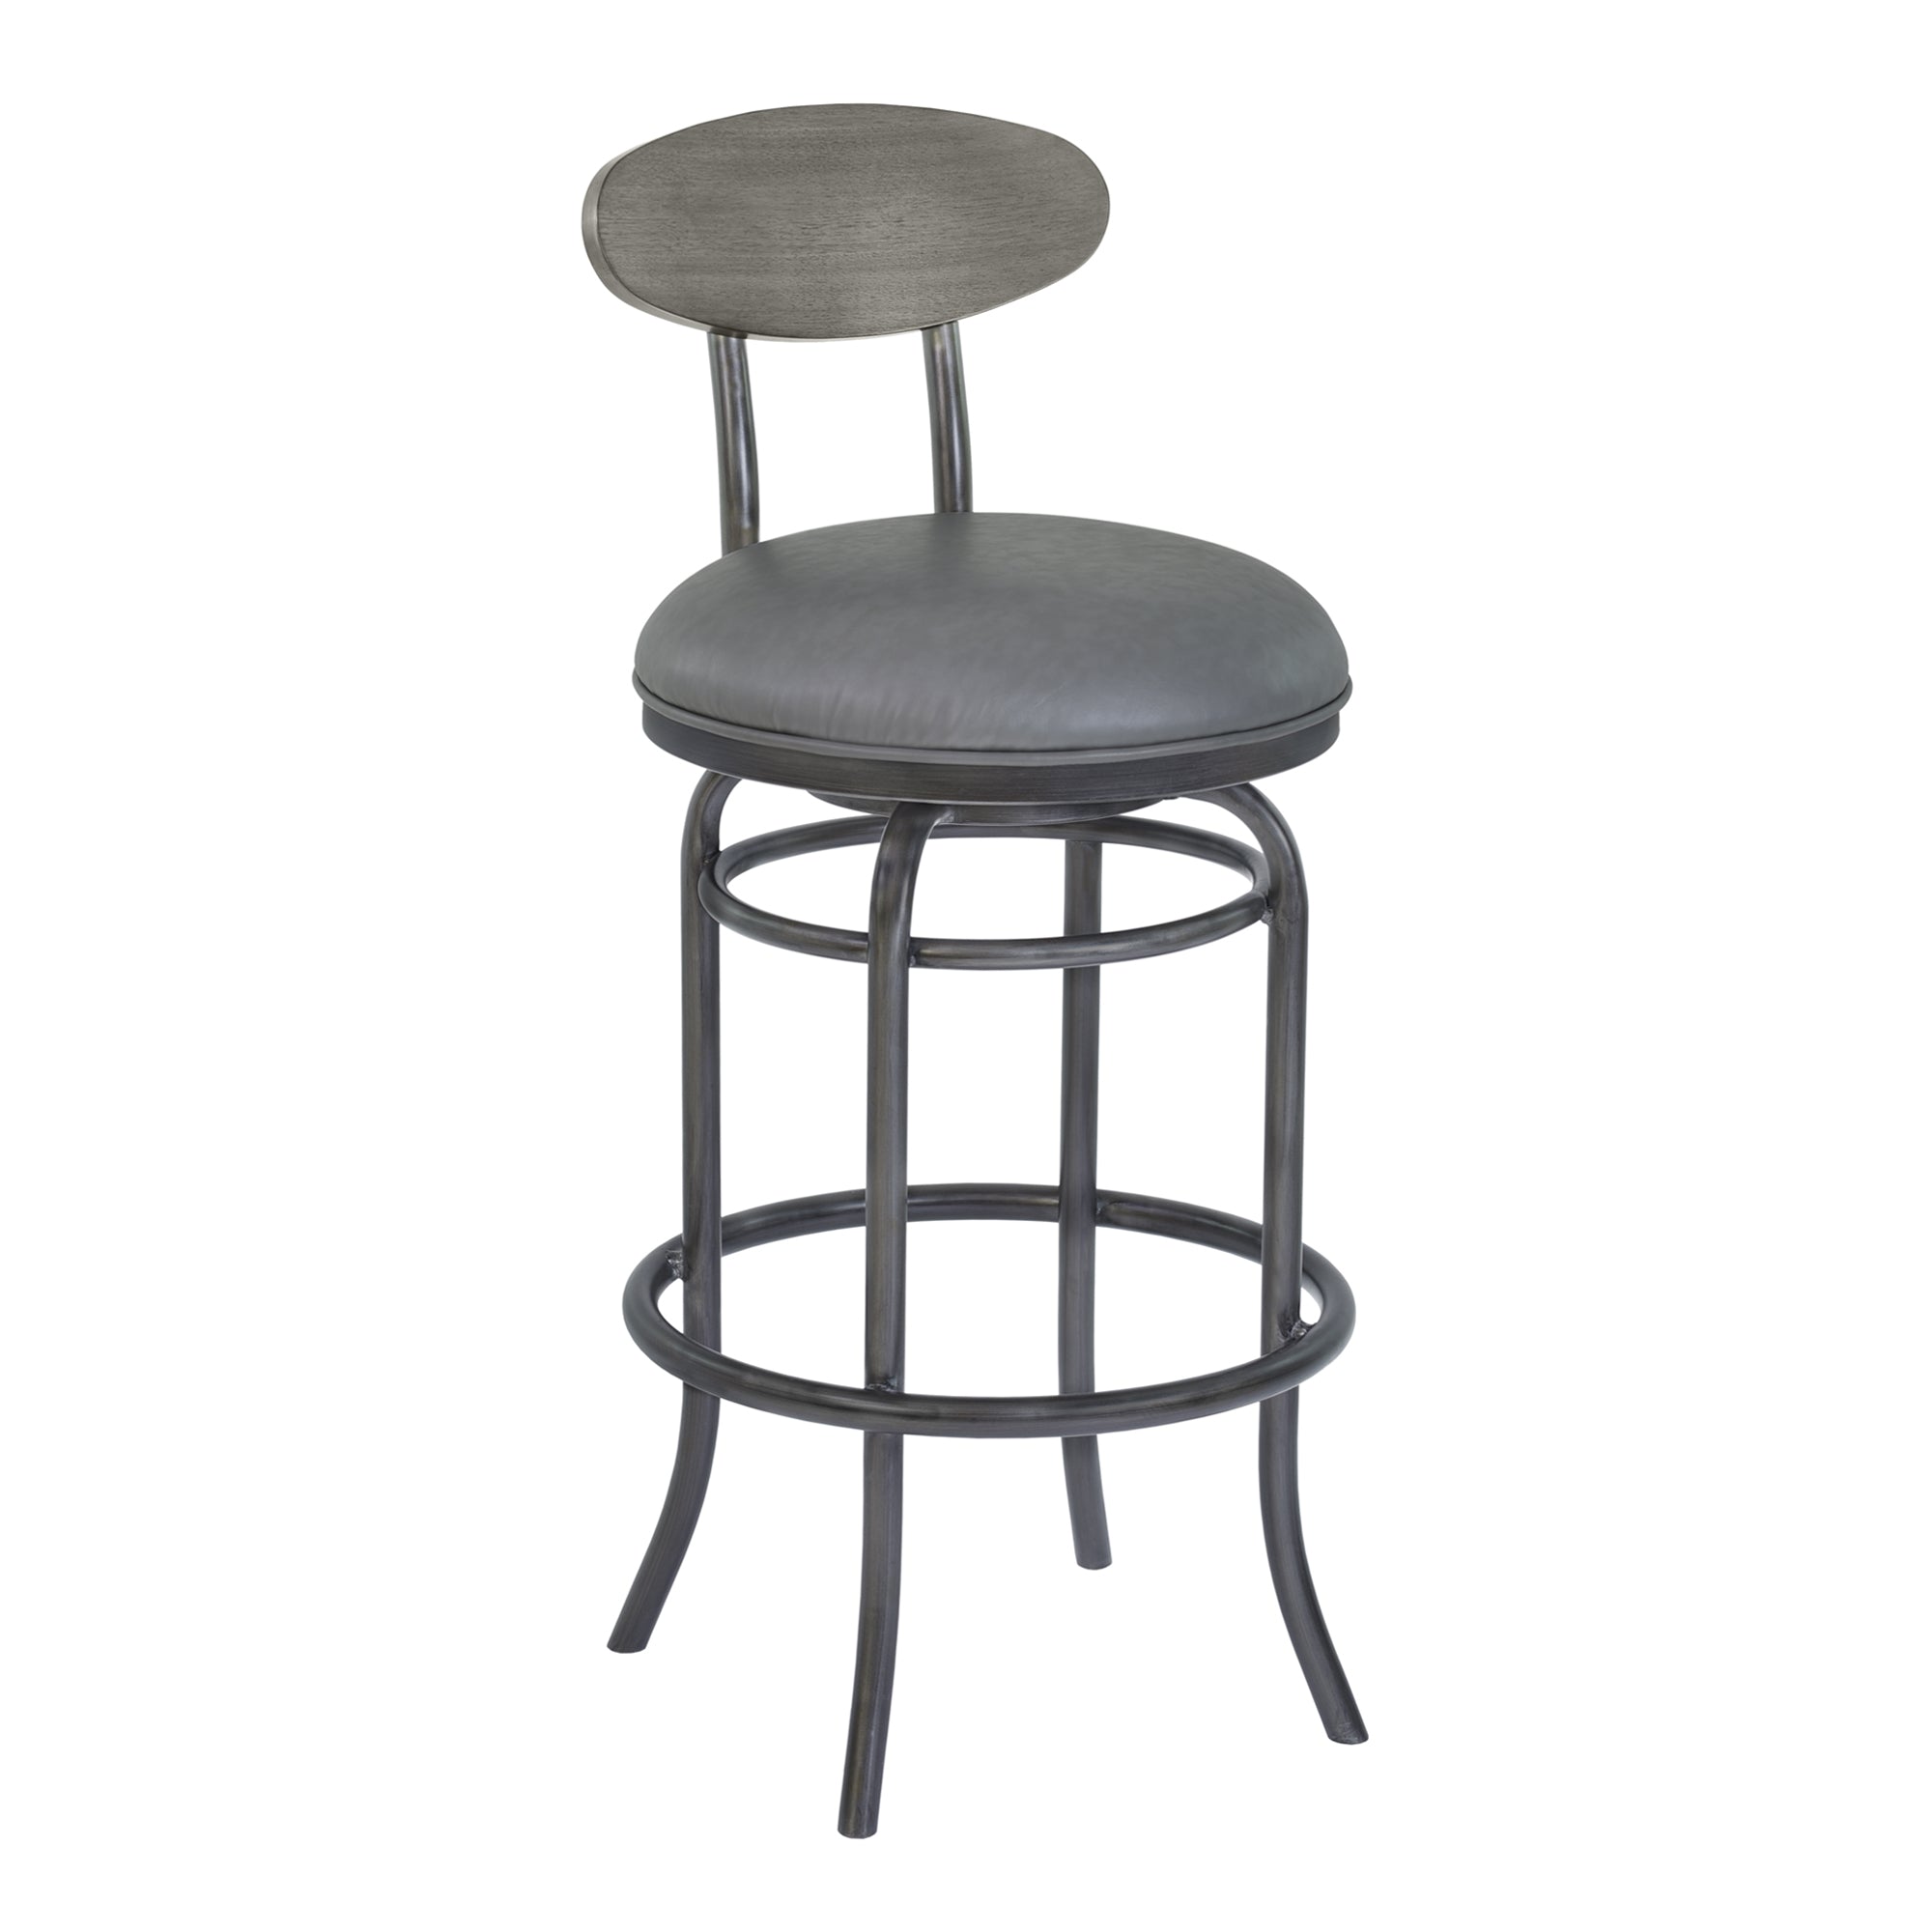 Armen Living Lcdabamfvg30 Davis 30" Bar Height Metal Swivel Barstool In Vintage Gray Faux Leather With Mineral Finish And Gray Walnut Wood Back